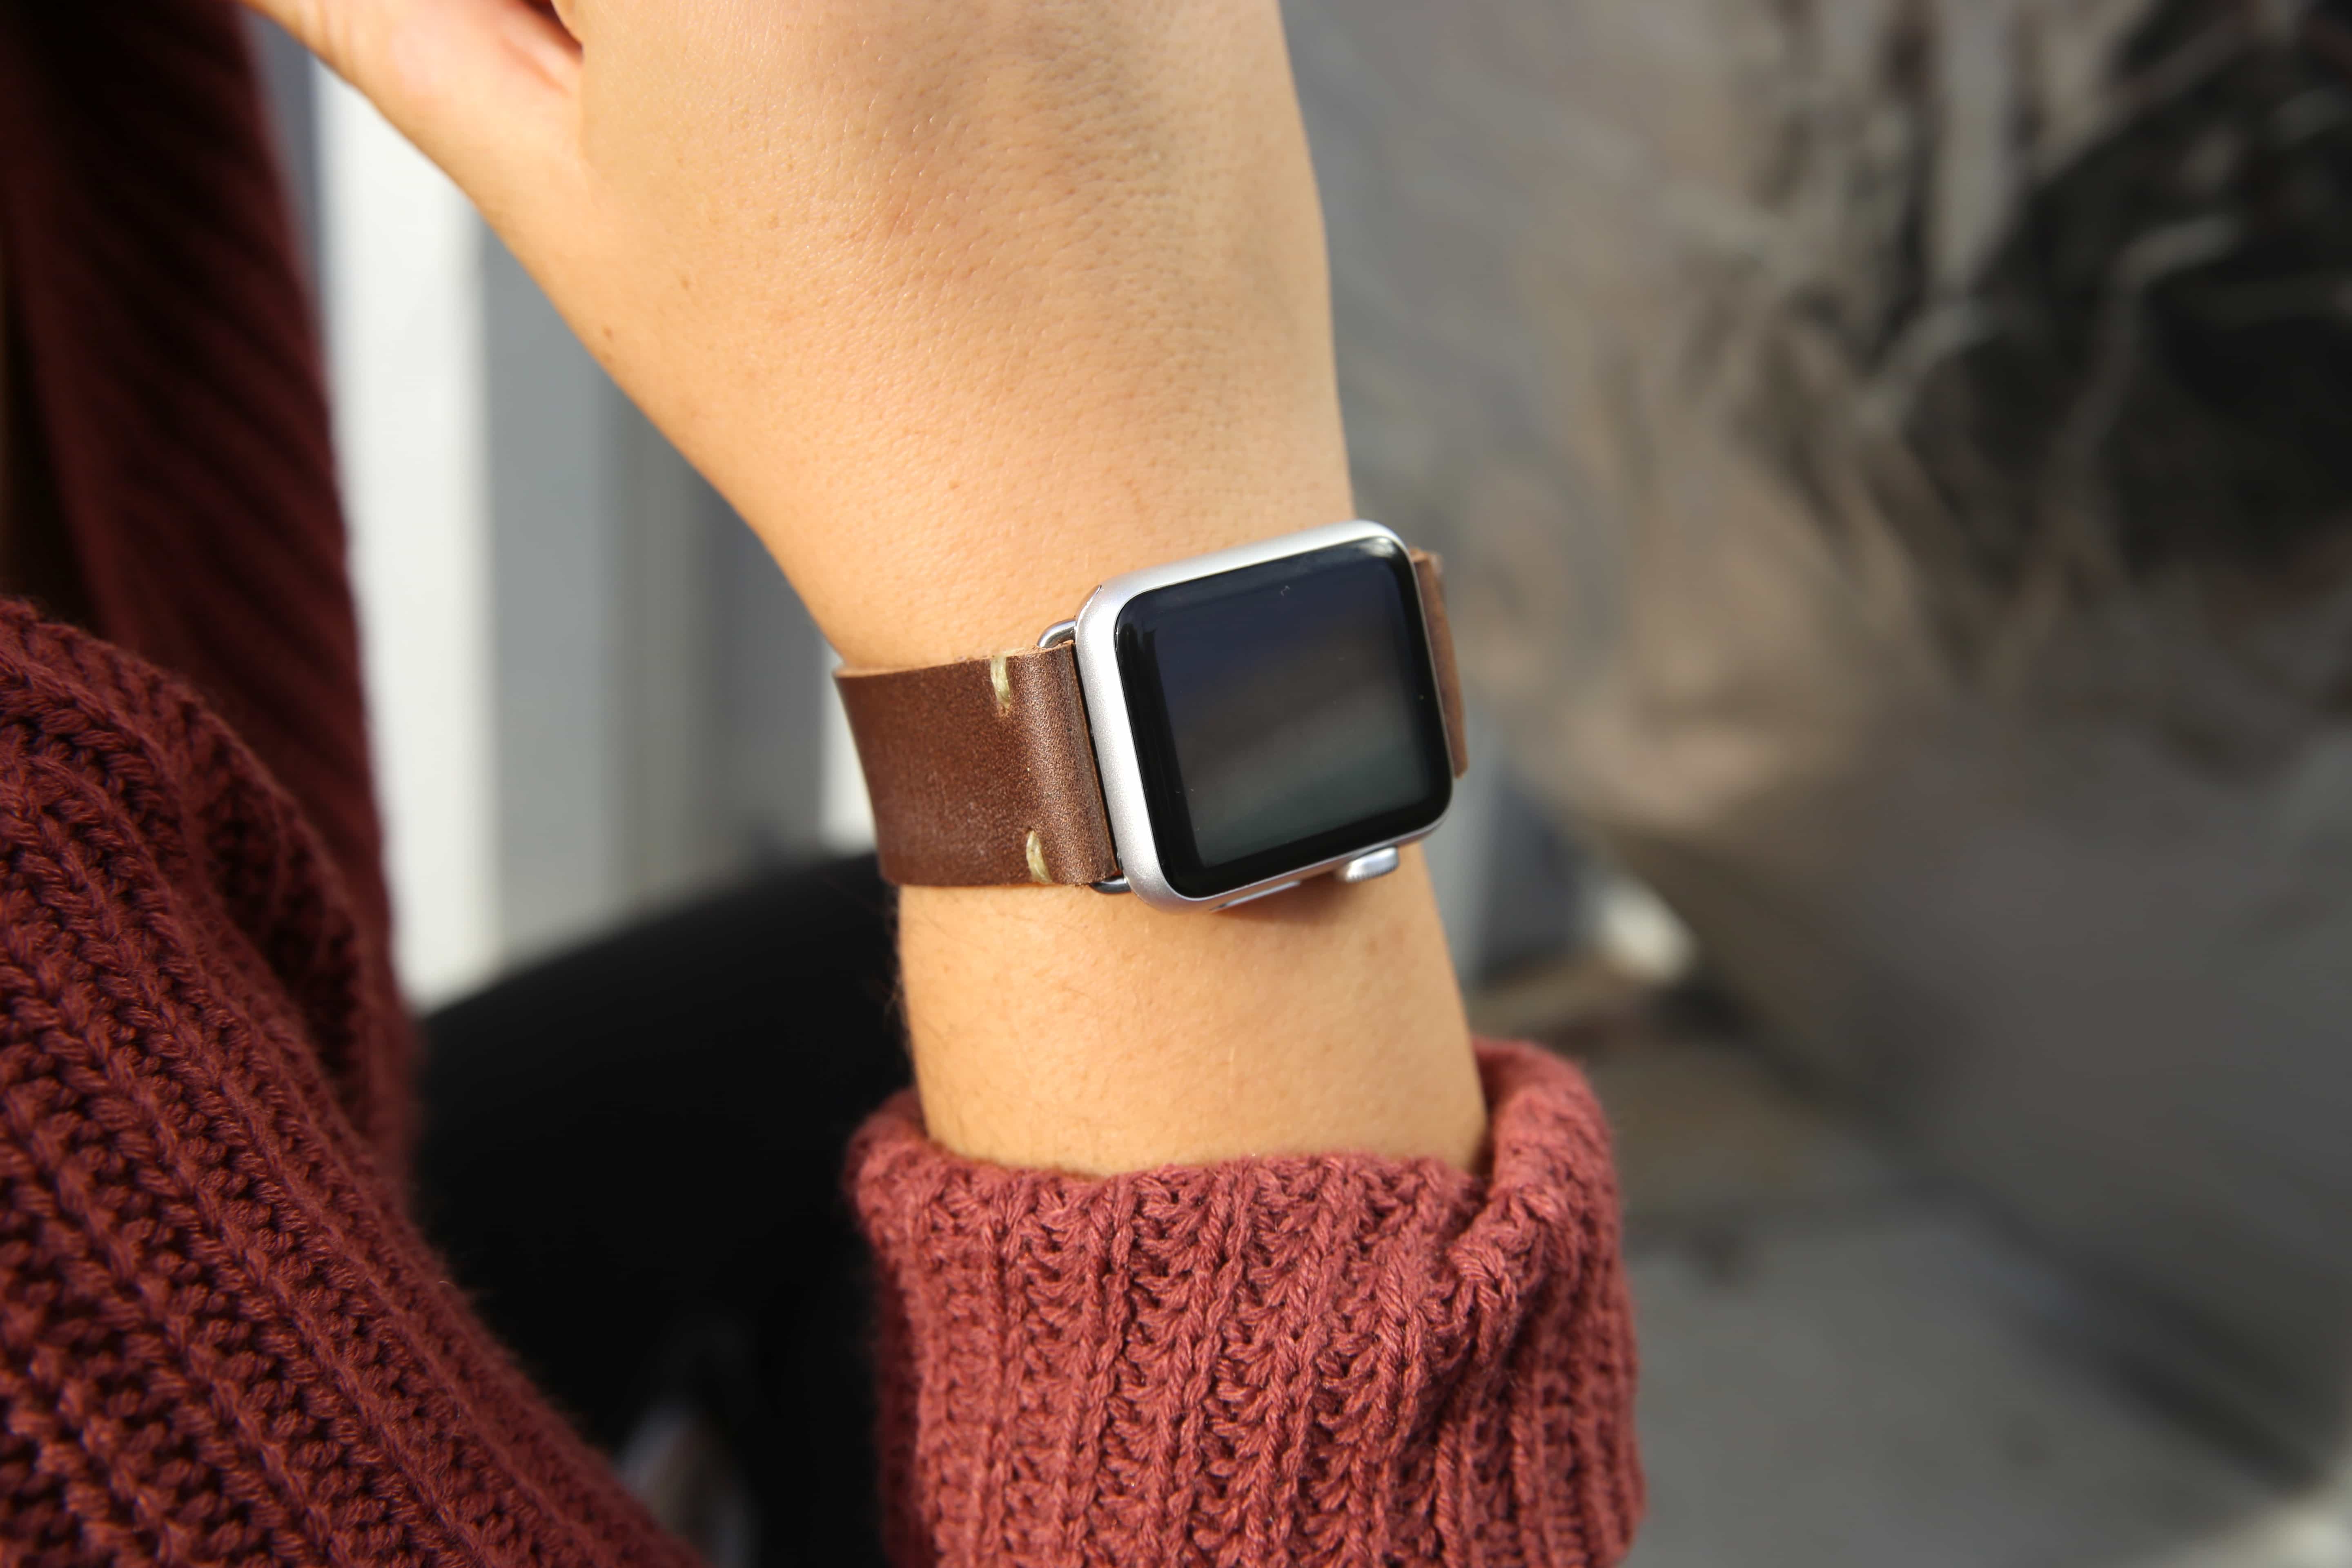 E3's handmade Apple Watch bands are the perfect holiday gift